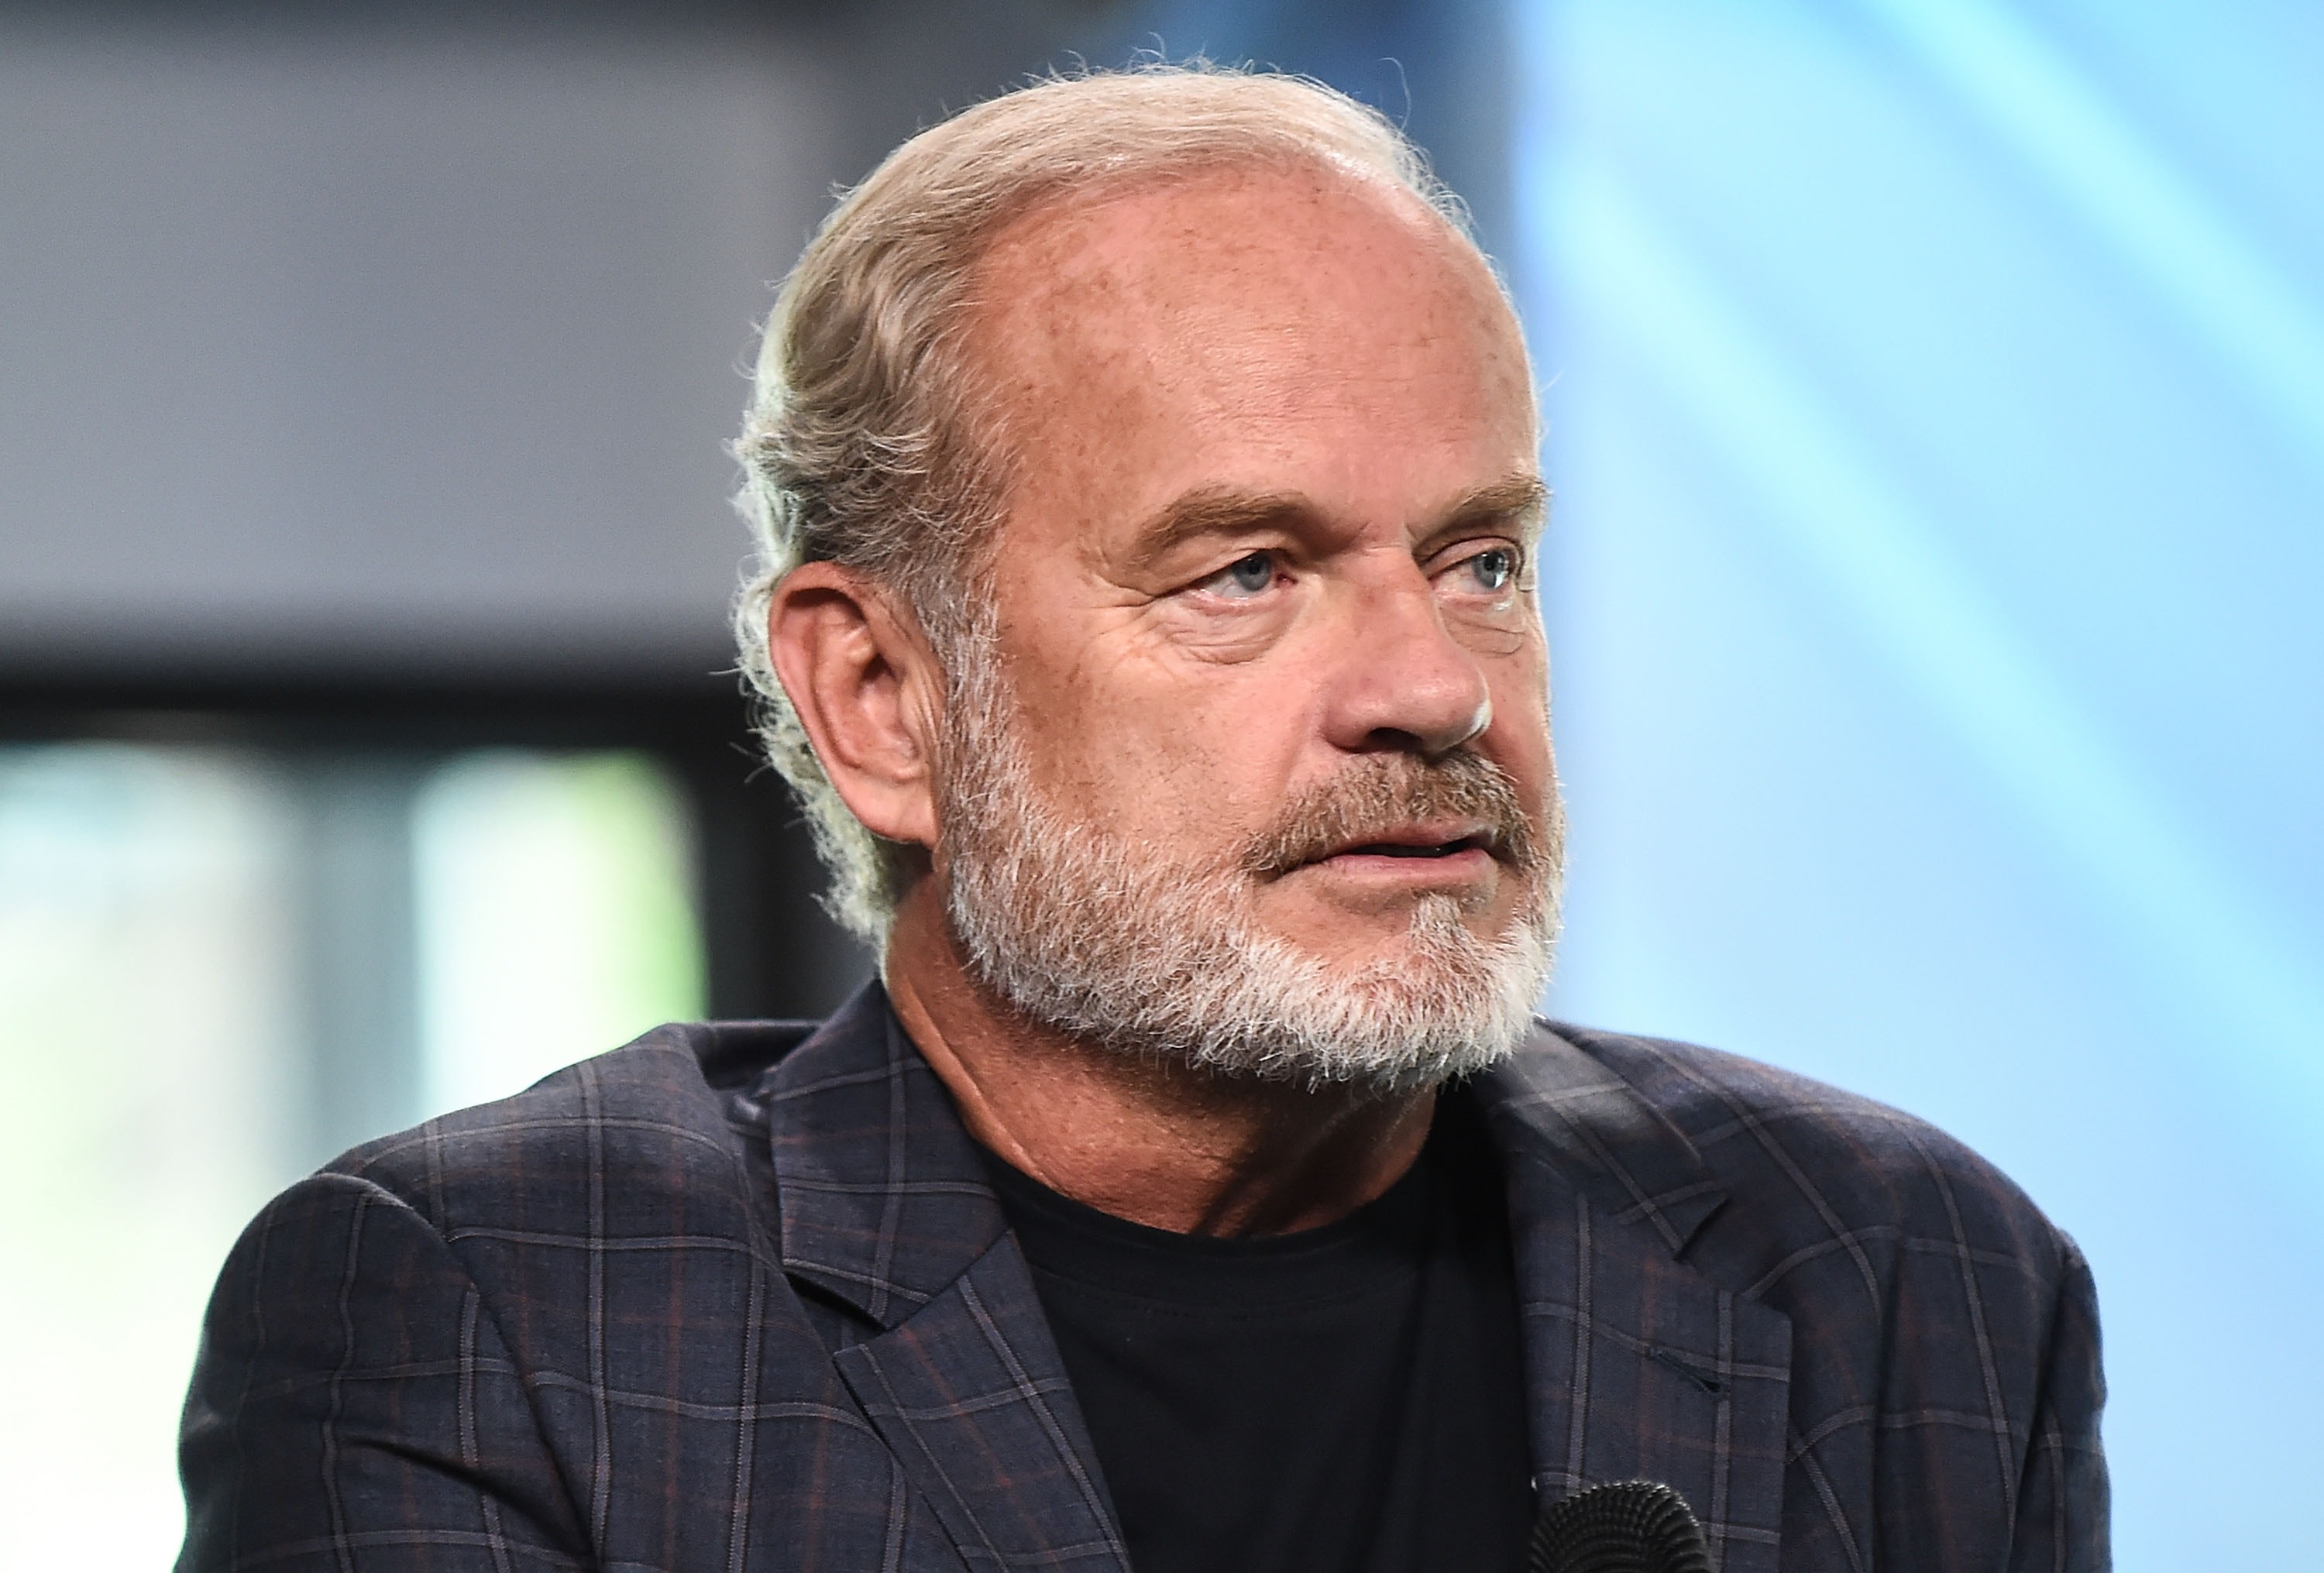 Kelsey Grammer at the Build Series to discuss the "The Last Tycoon" on July 26, 2017, in New York City | Source: Getty Images